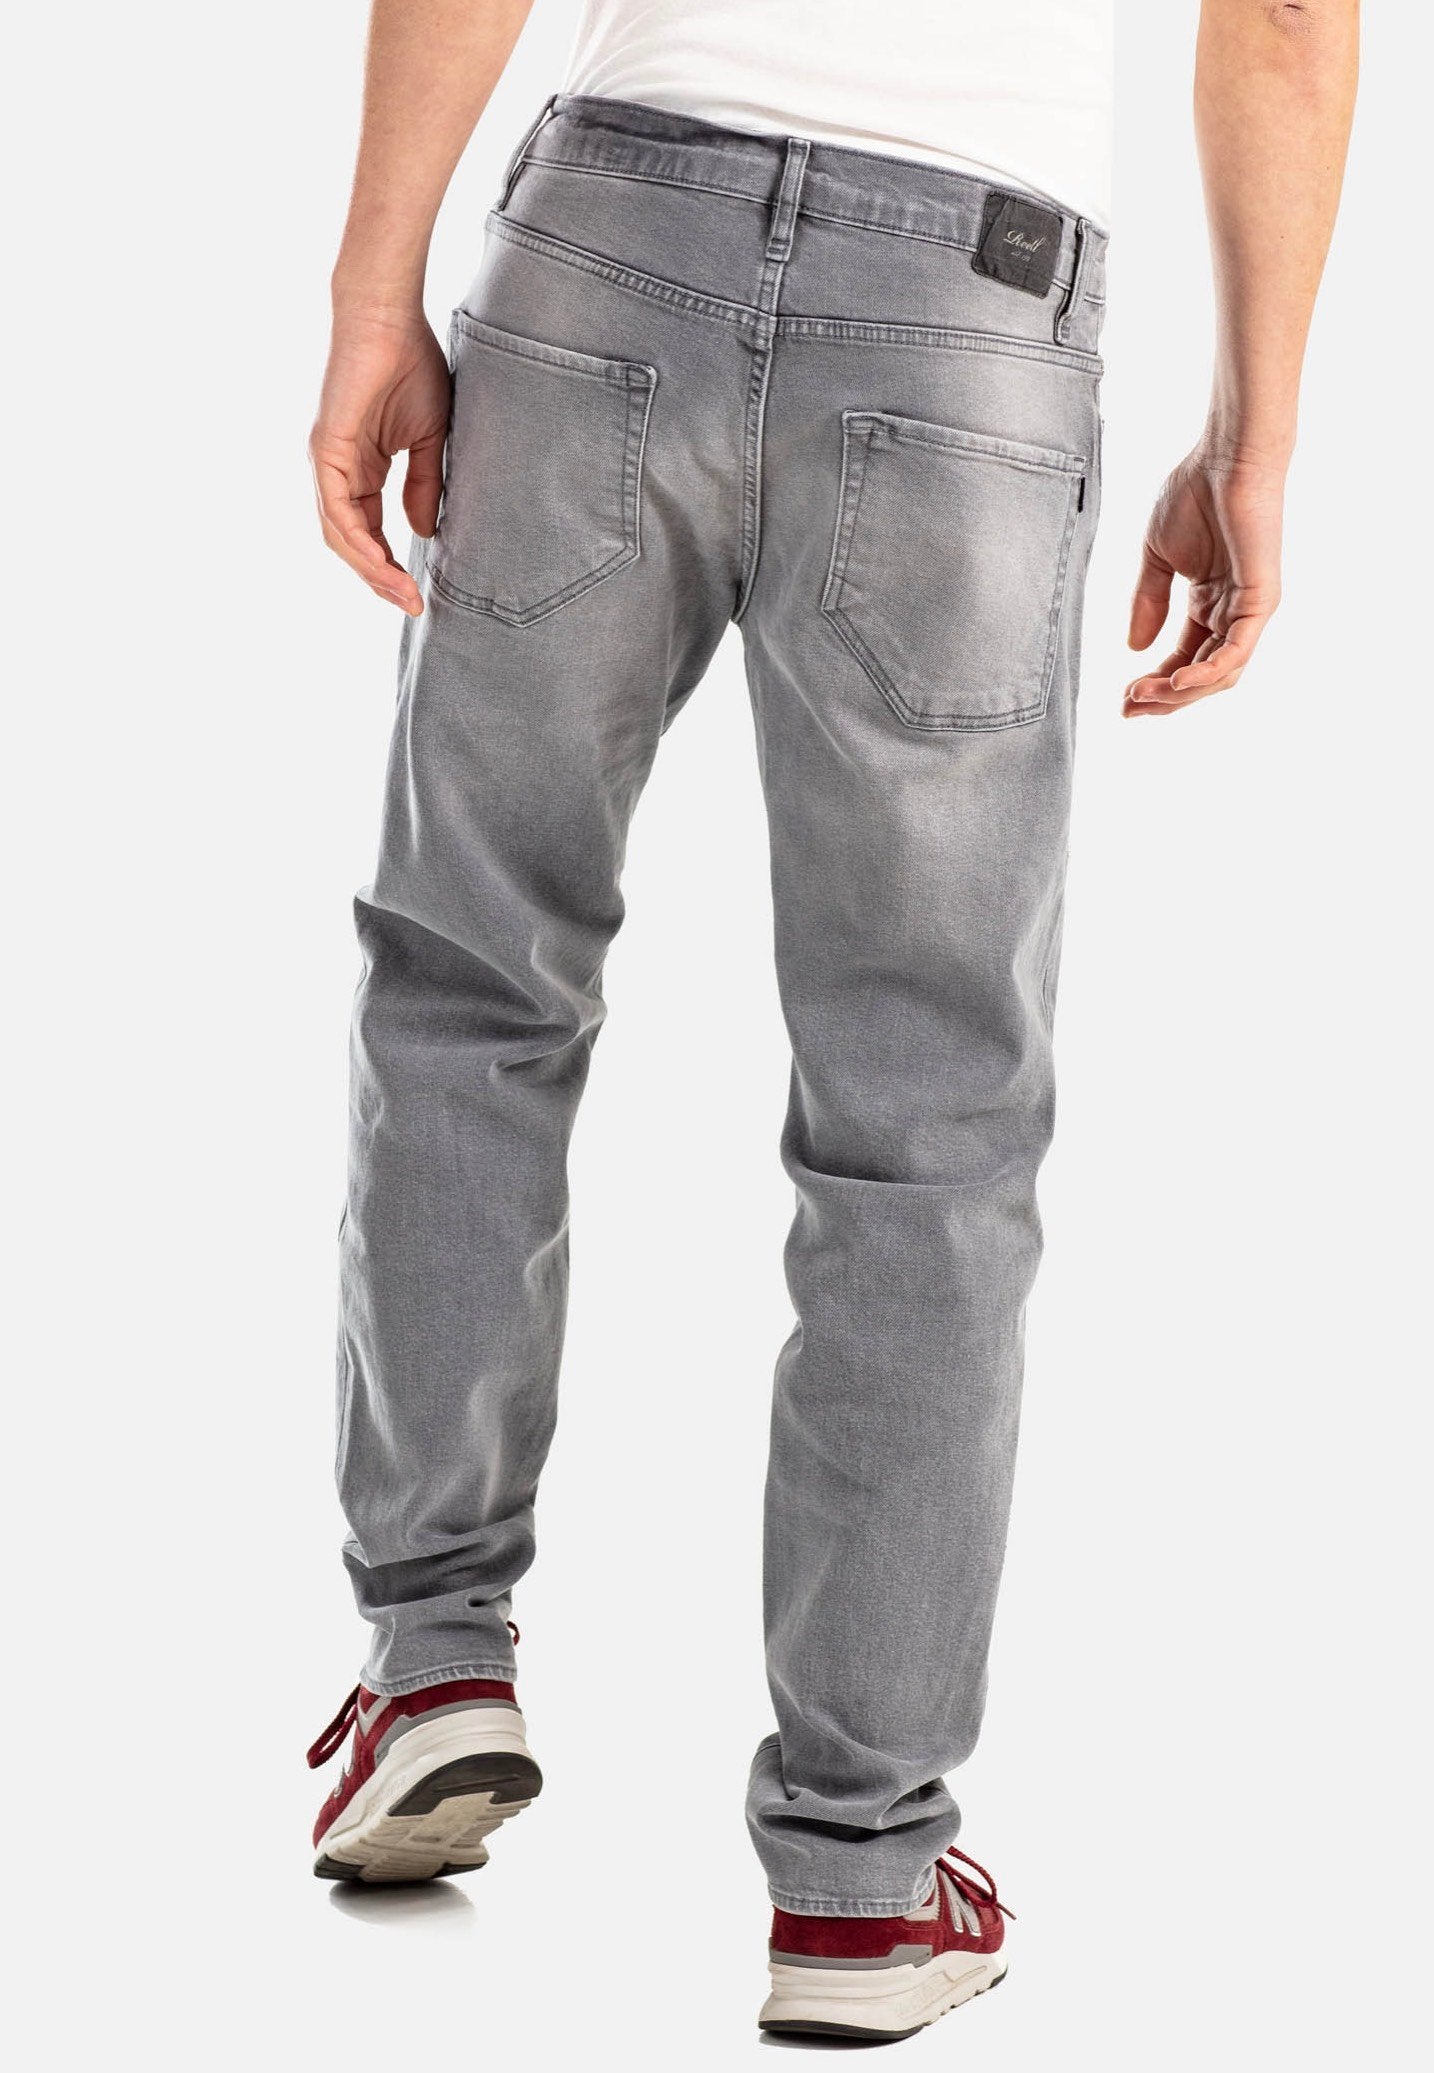 REELL - Barfly Concrete Grey - Jeans